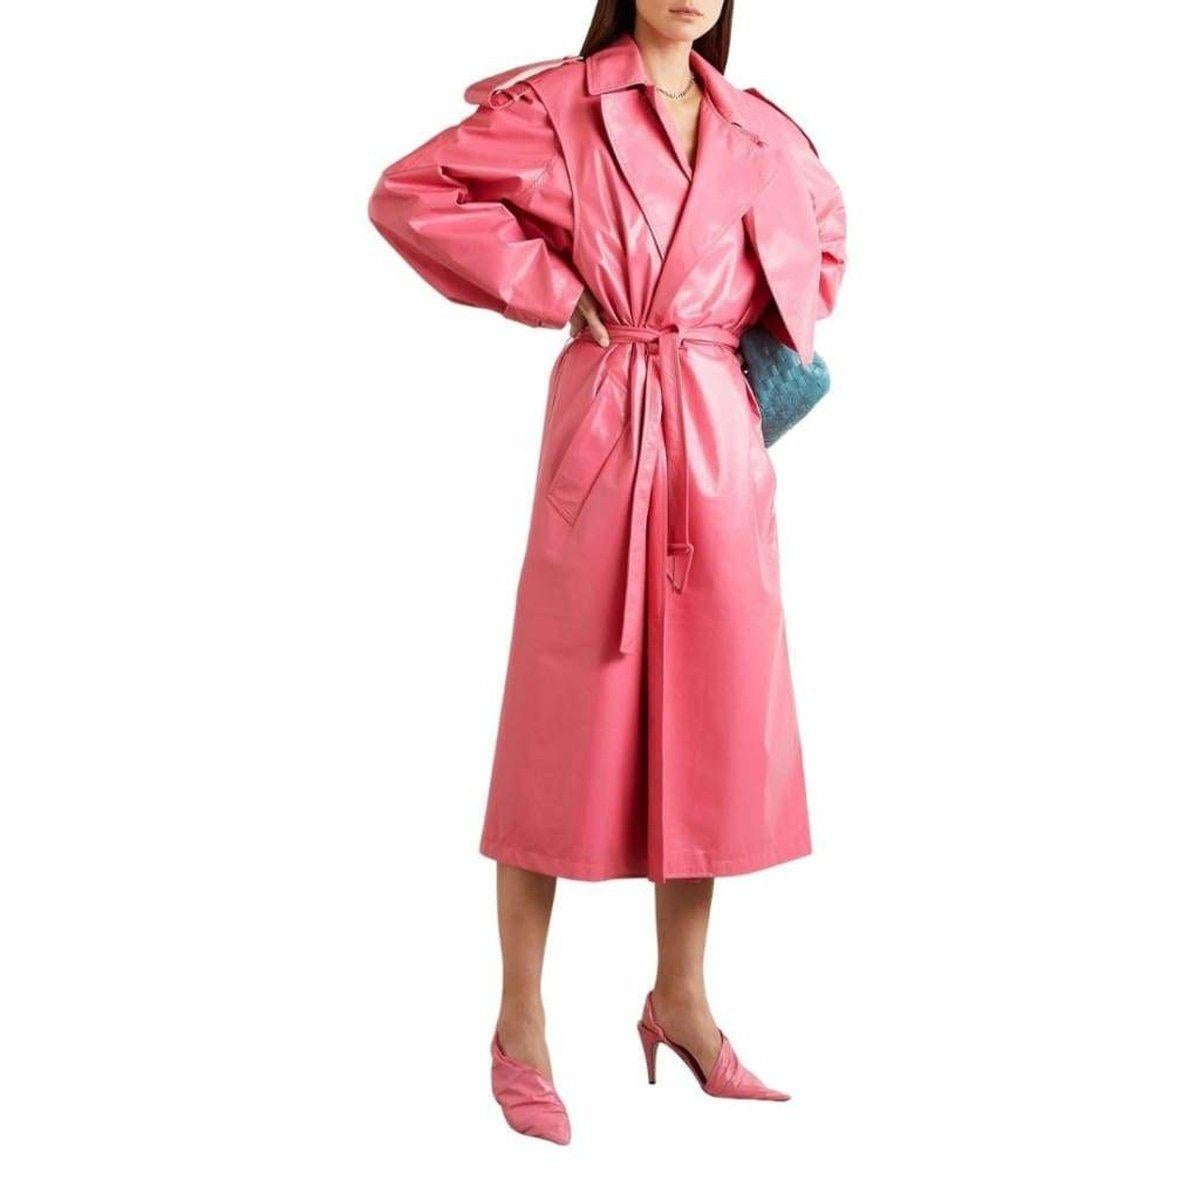 This trench coat is cut from crinkled glossed-leather in a vibrant 'Candy' pink hue and traced with strategically placed snaps - they'll allow you to transform it into a cropped jacket or sleeveless vest, depending on your mood. The triangular